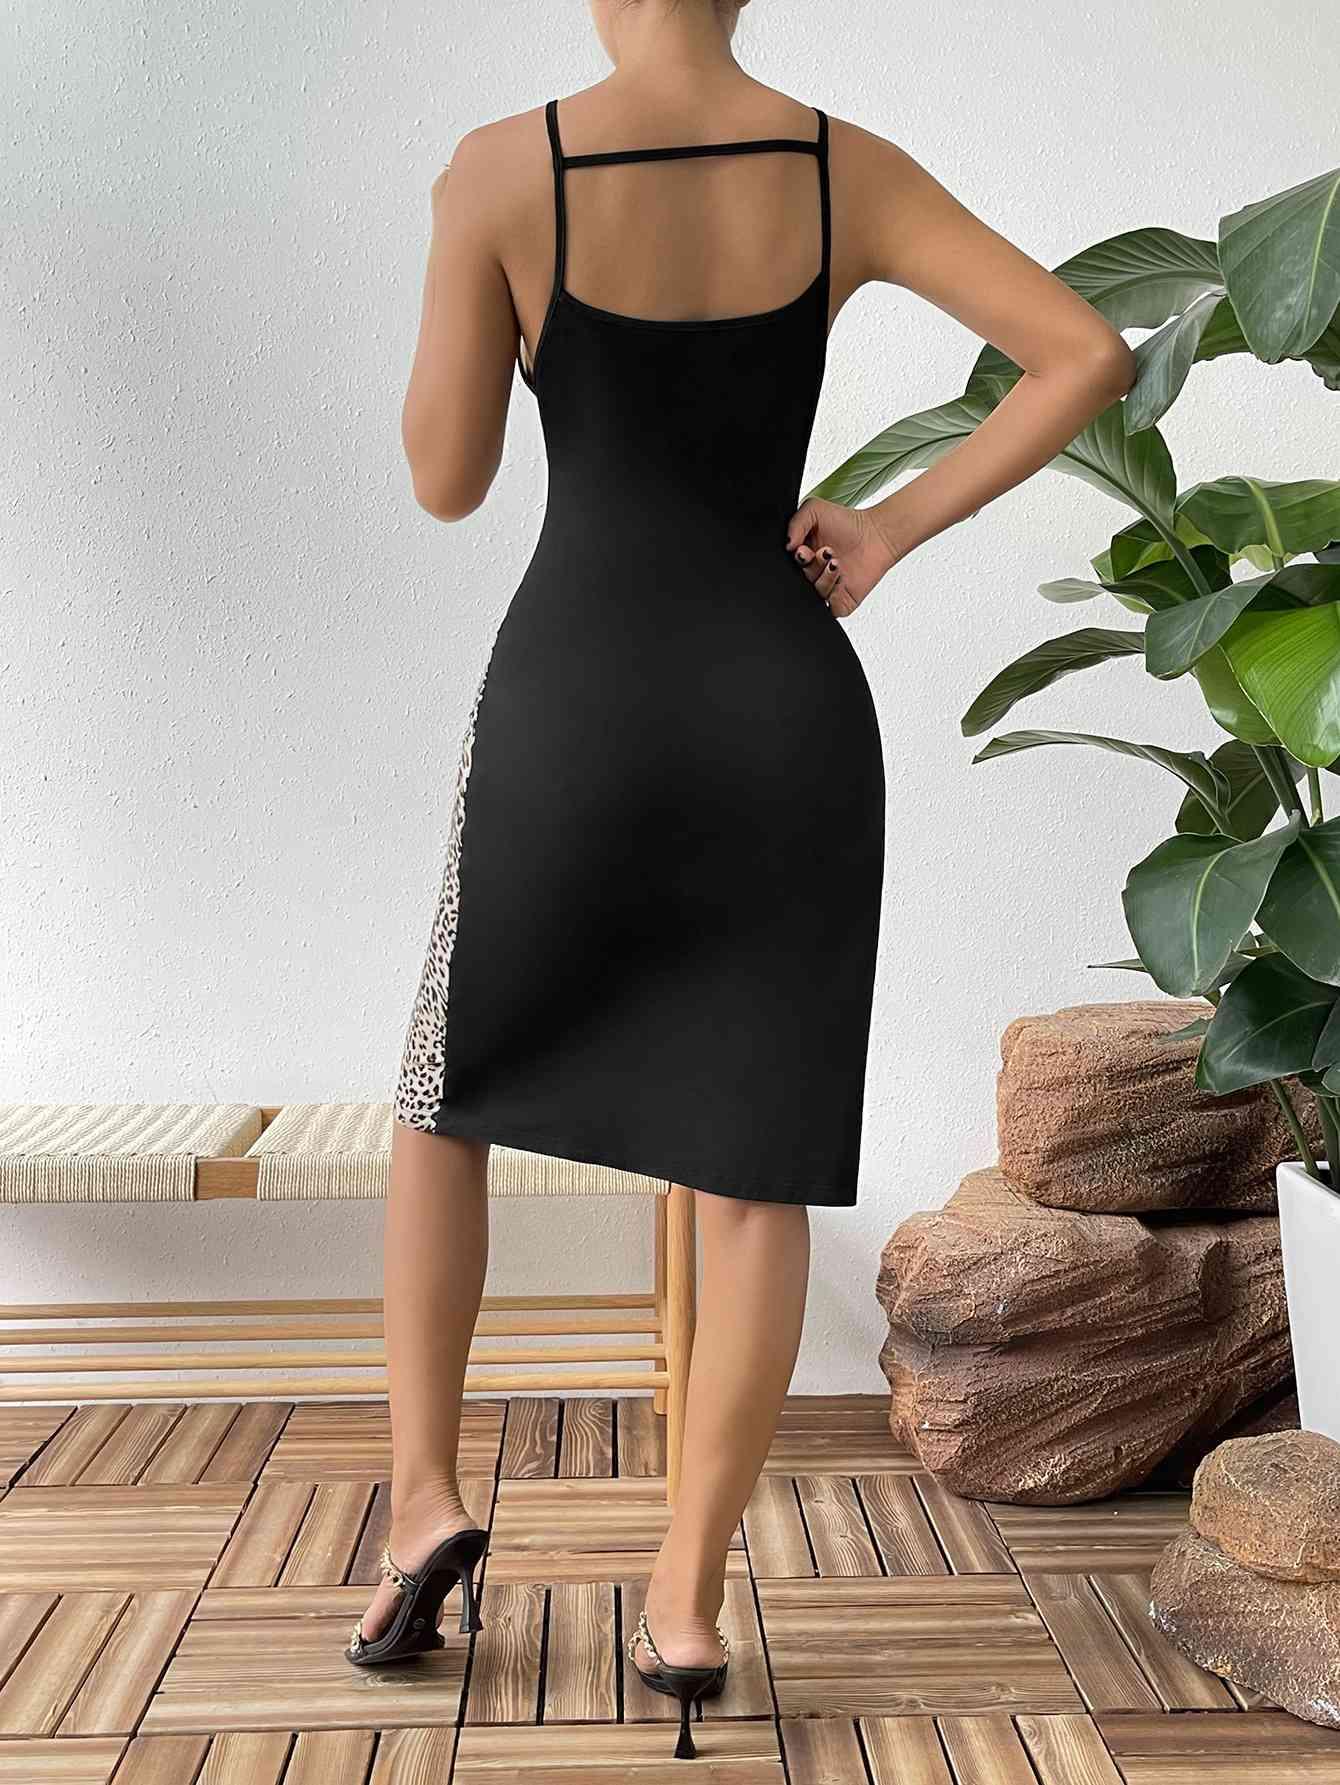 a woman in a black dress standing on a wooden floor